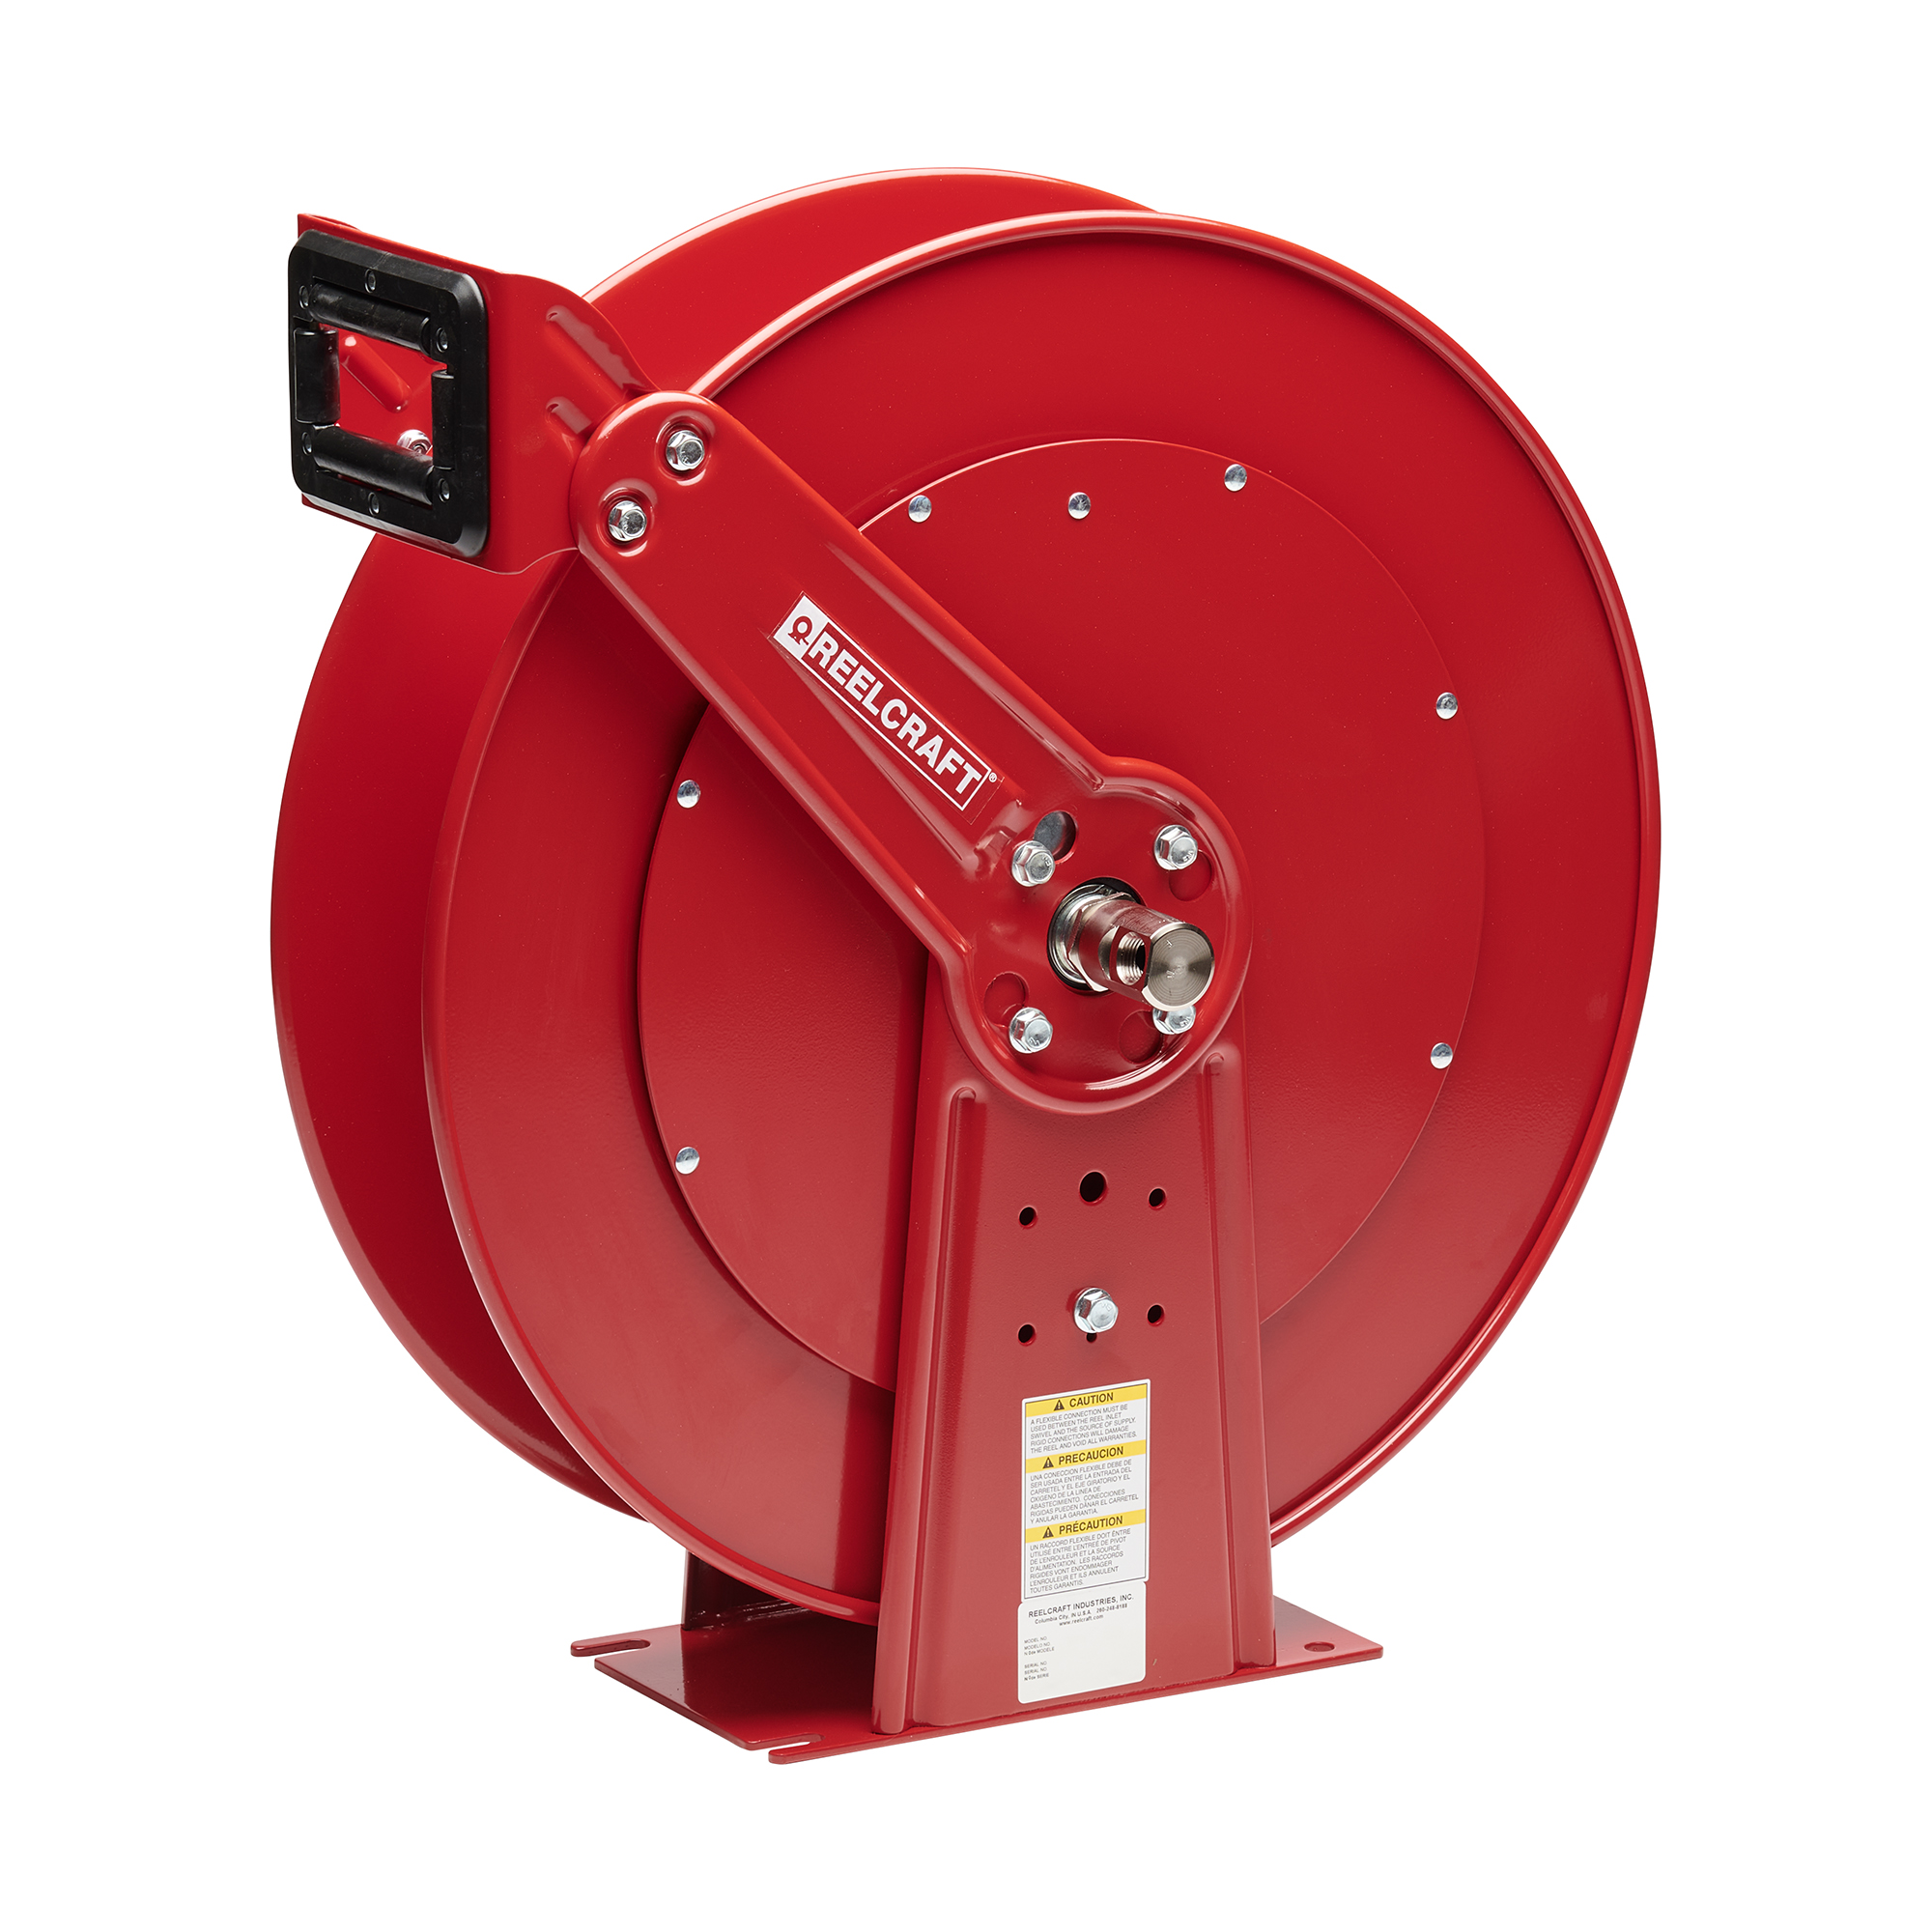 HR28 BIG Manual Hose Reel Professional Mtm Hydro made of Painted